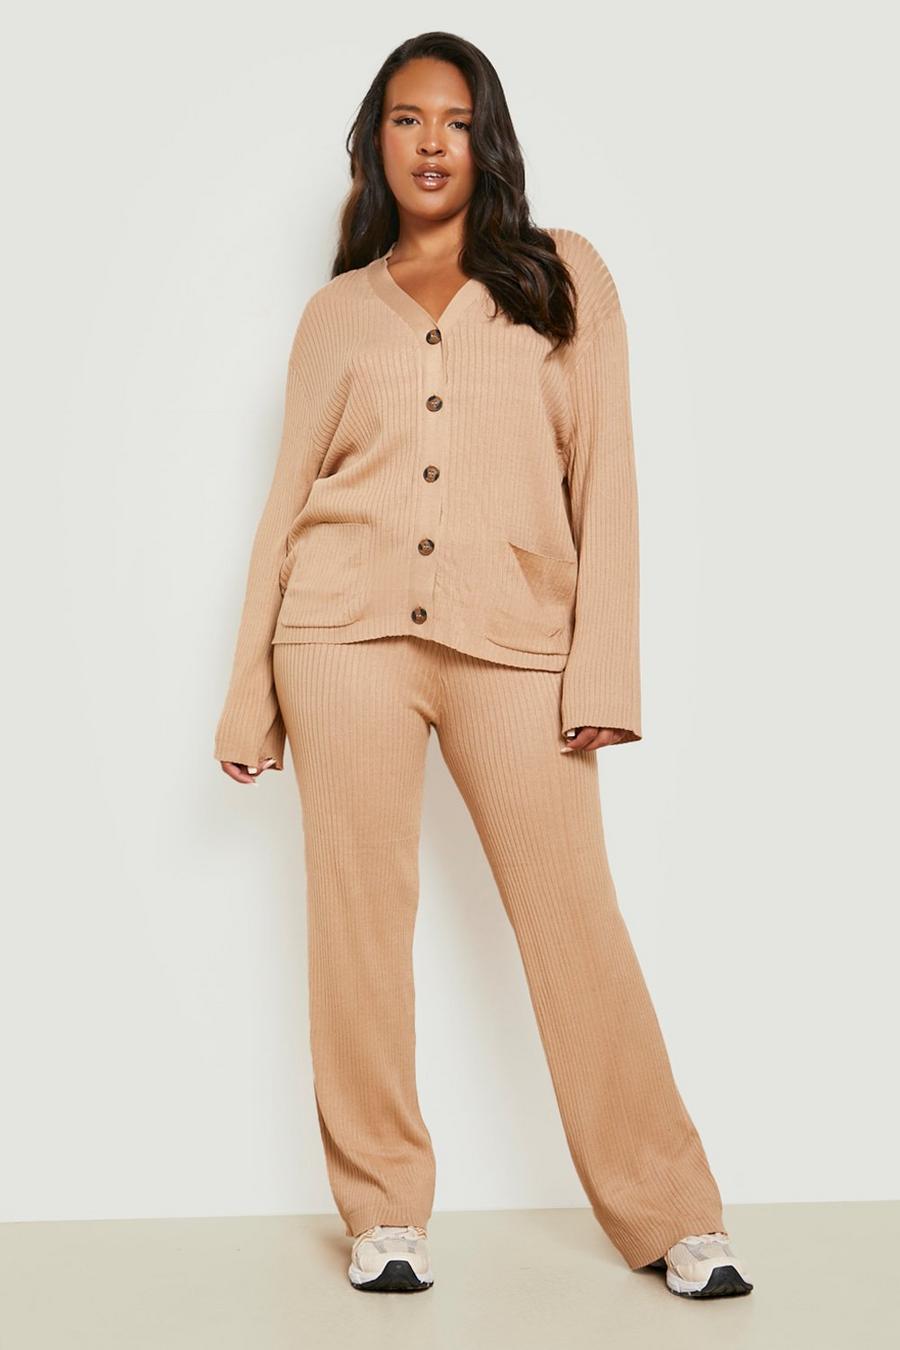 Camel beis Plus Rib Knit Buttoned Cardigan & Trouser Co-ord